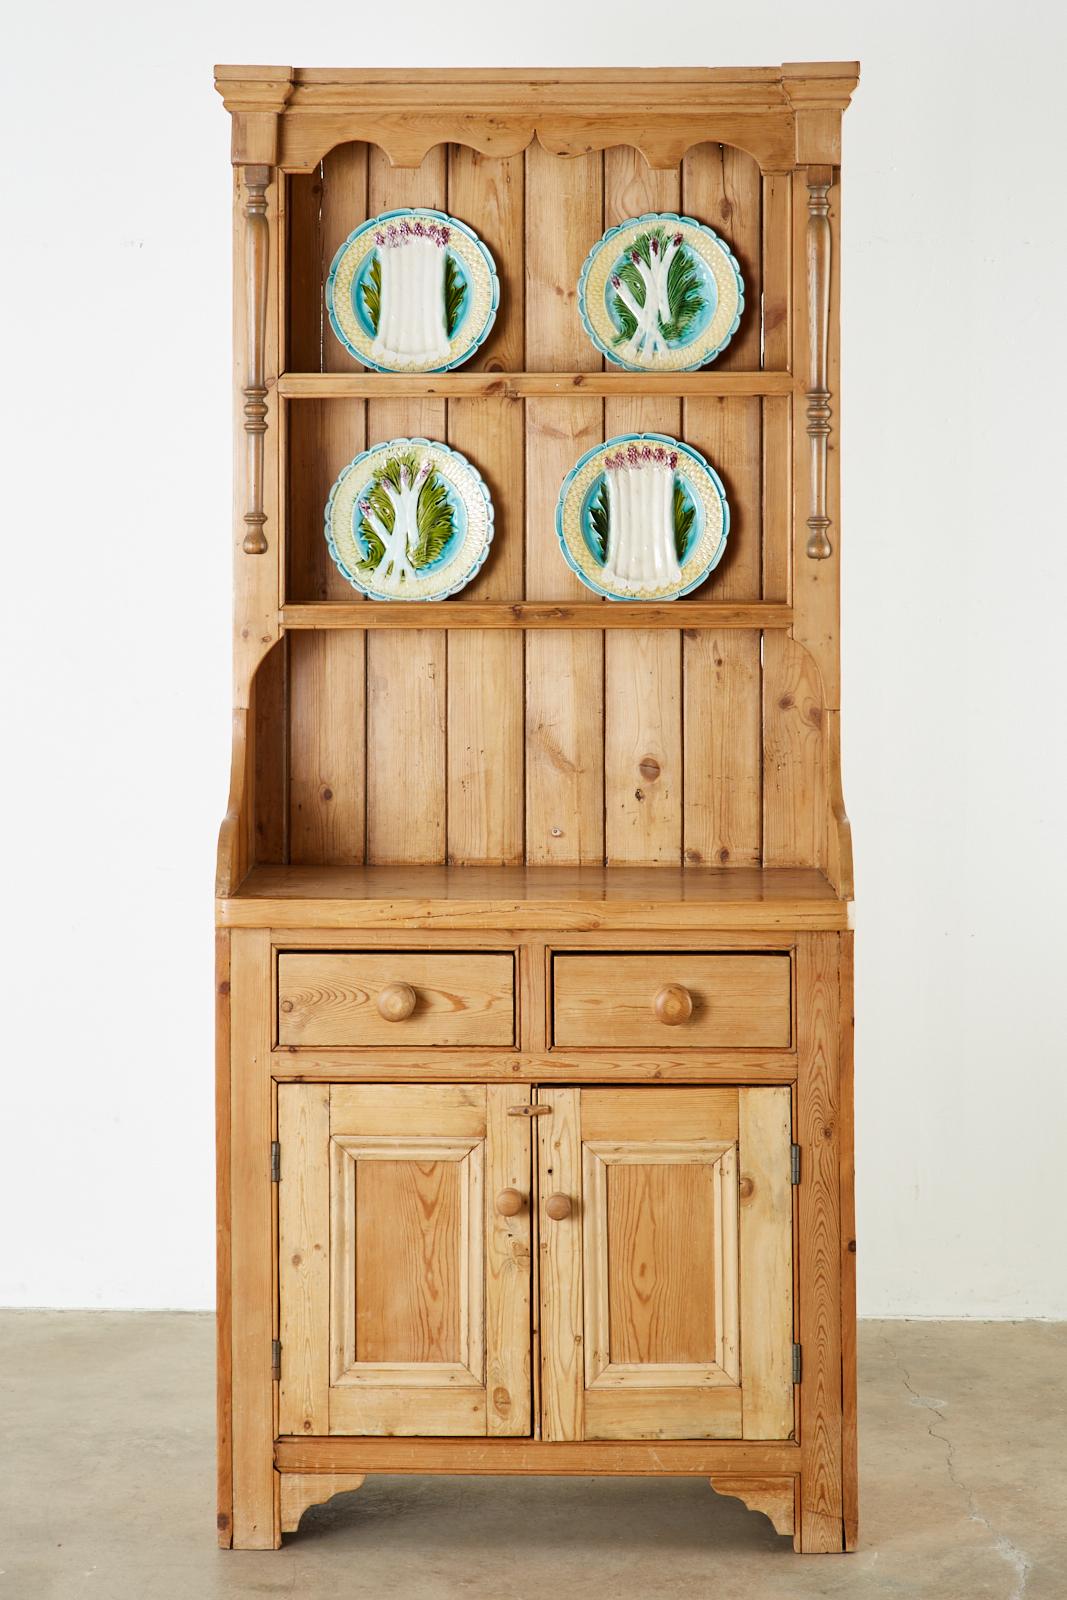 Rustic country English welsh dresser constructed from pine. The case features a two shelf cupboard on top decorated with pilaster columns on each side surmounted by a cornice top. The dresser is fronted by two storage drawers and two doors opening